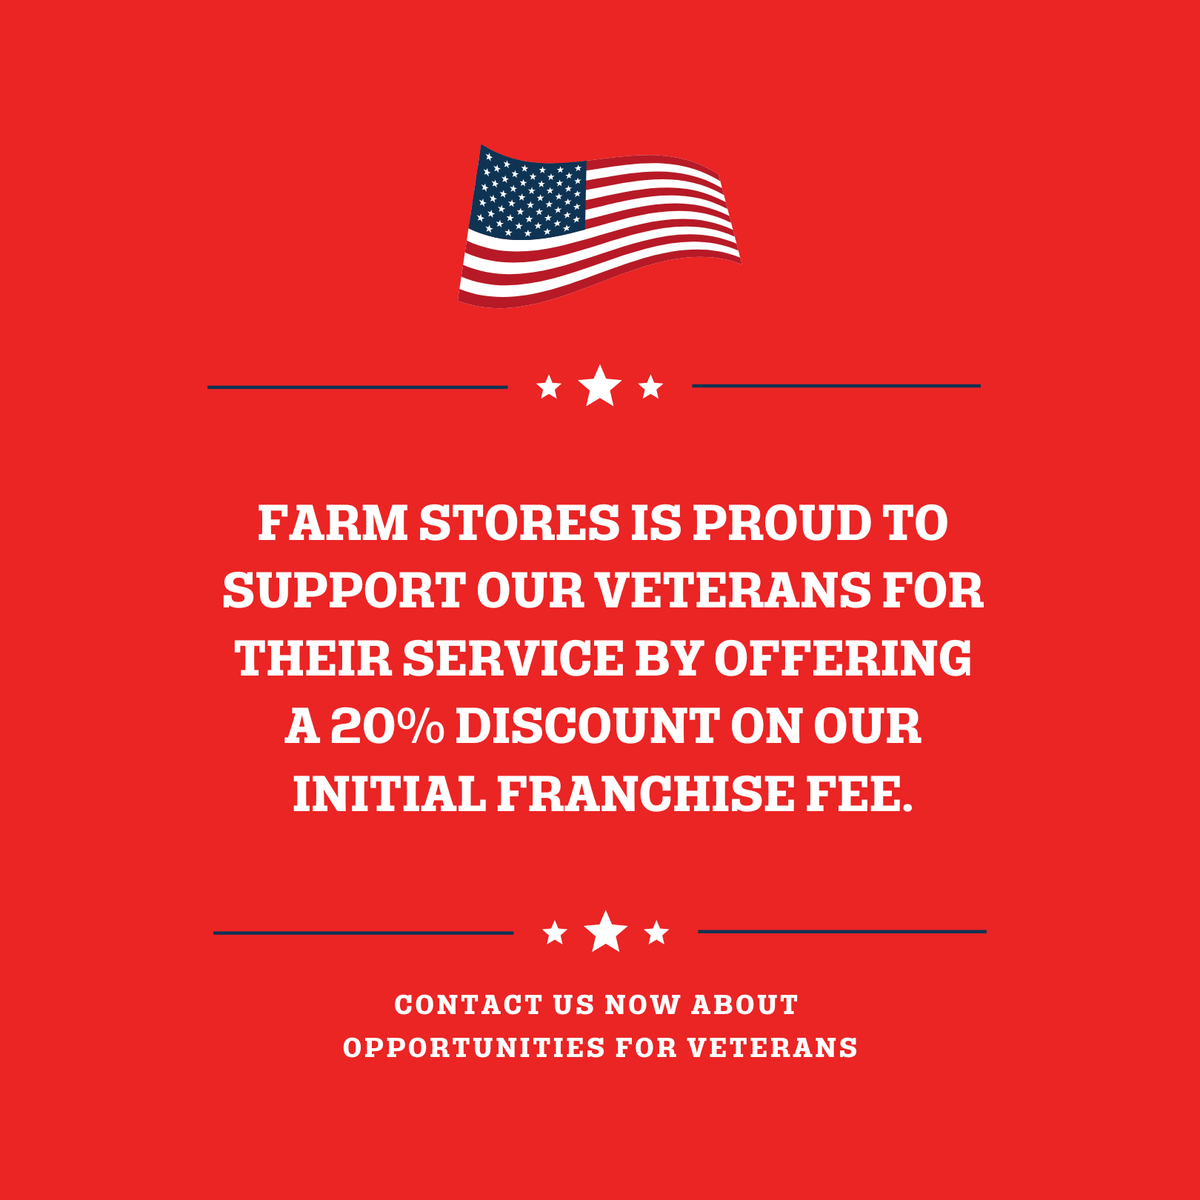 Happy Veterans Day from Farm Stores We honor all who have served and sacrificed for our country. Thank you, Veterans!